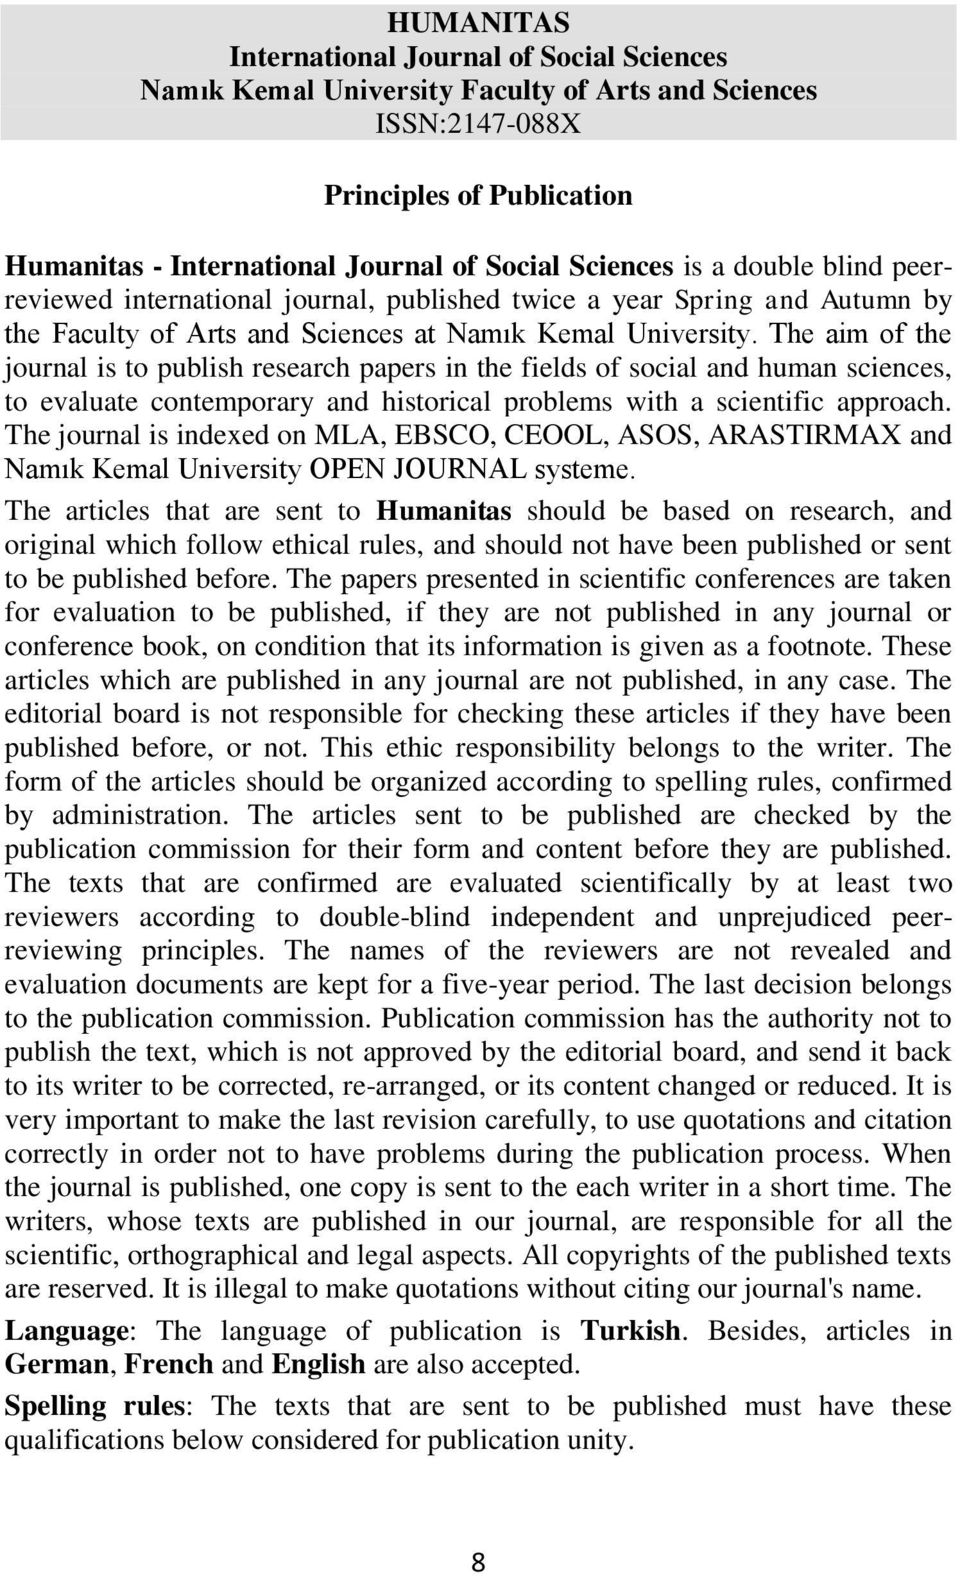 The aim of the journal is to publish research papers in the fields of social and human sciences, to evaluate contemporary and historical problems with a scientific approach.